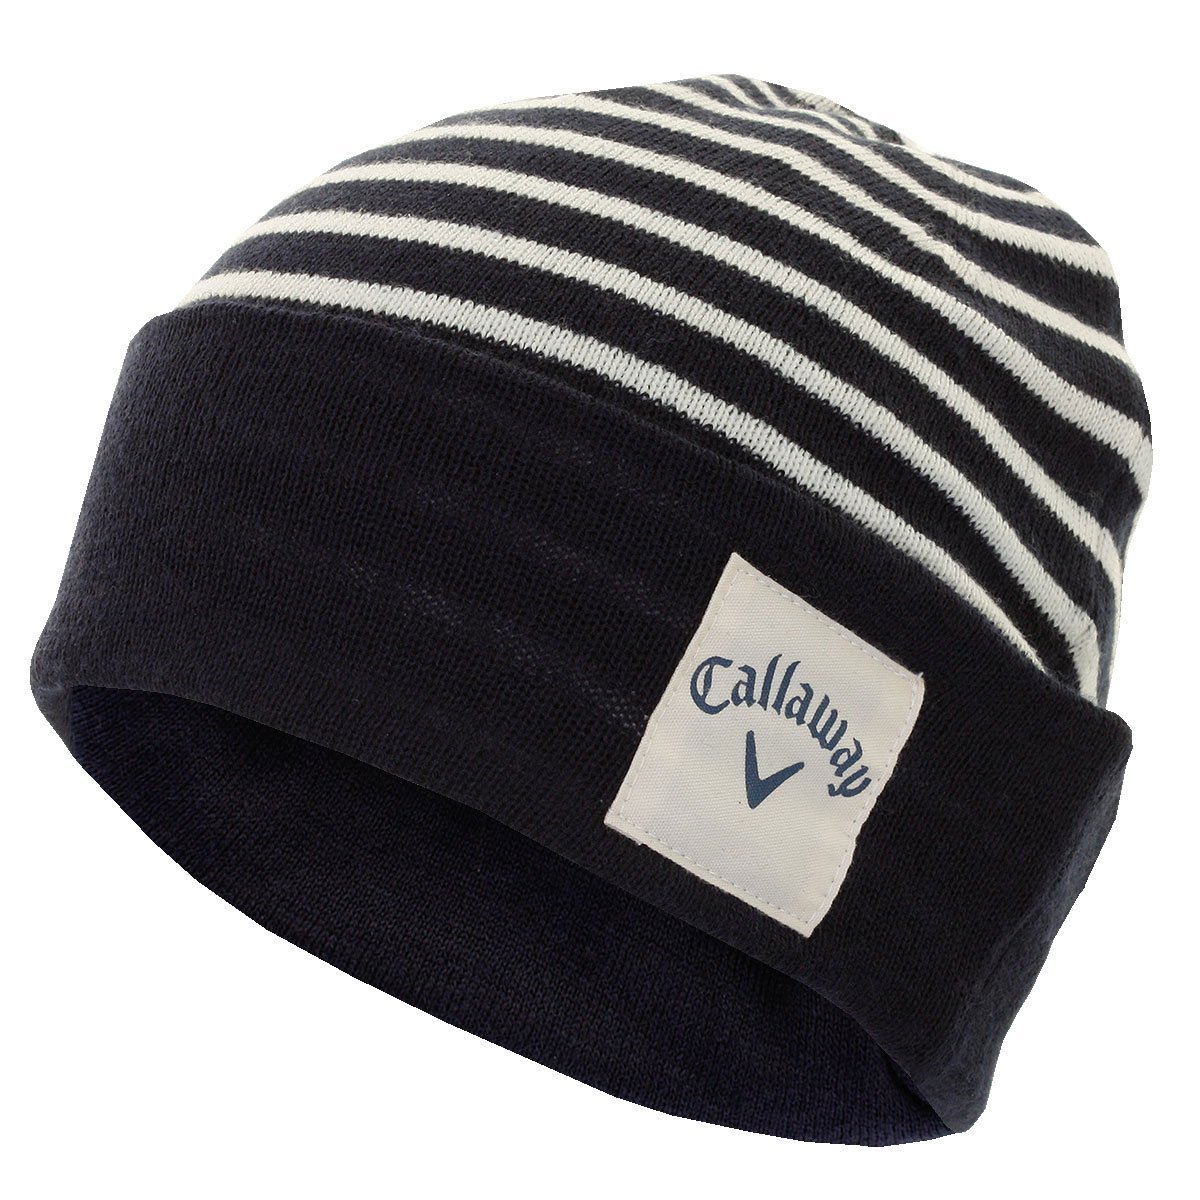 mens wooly hat